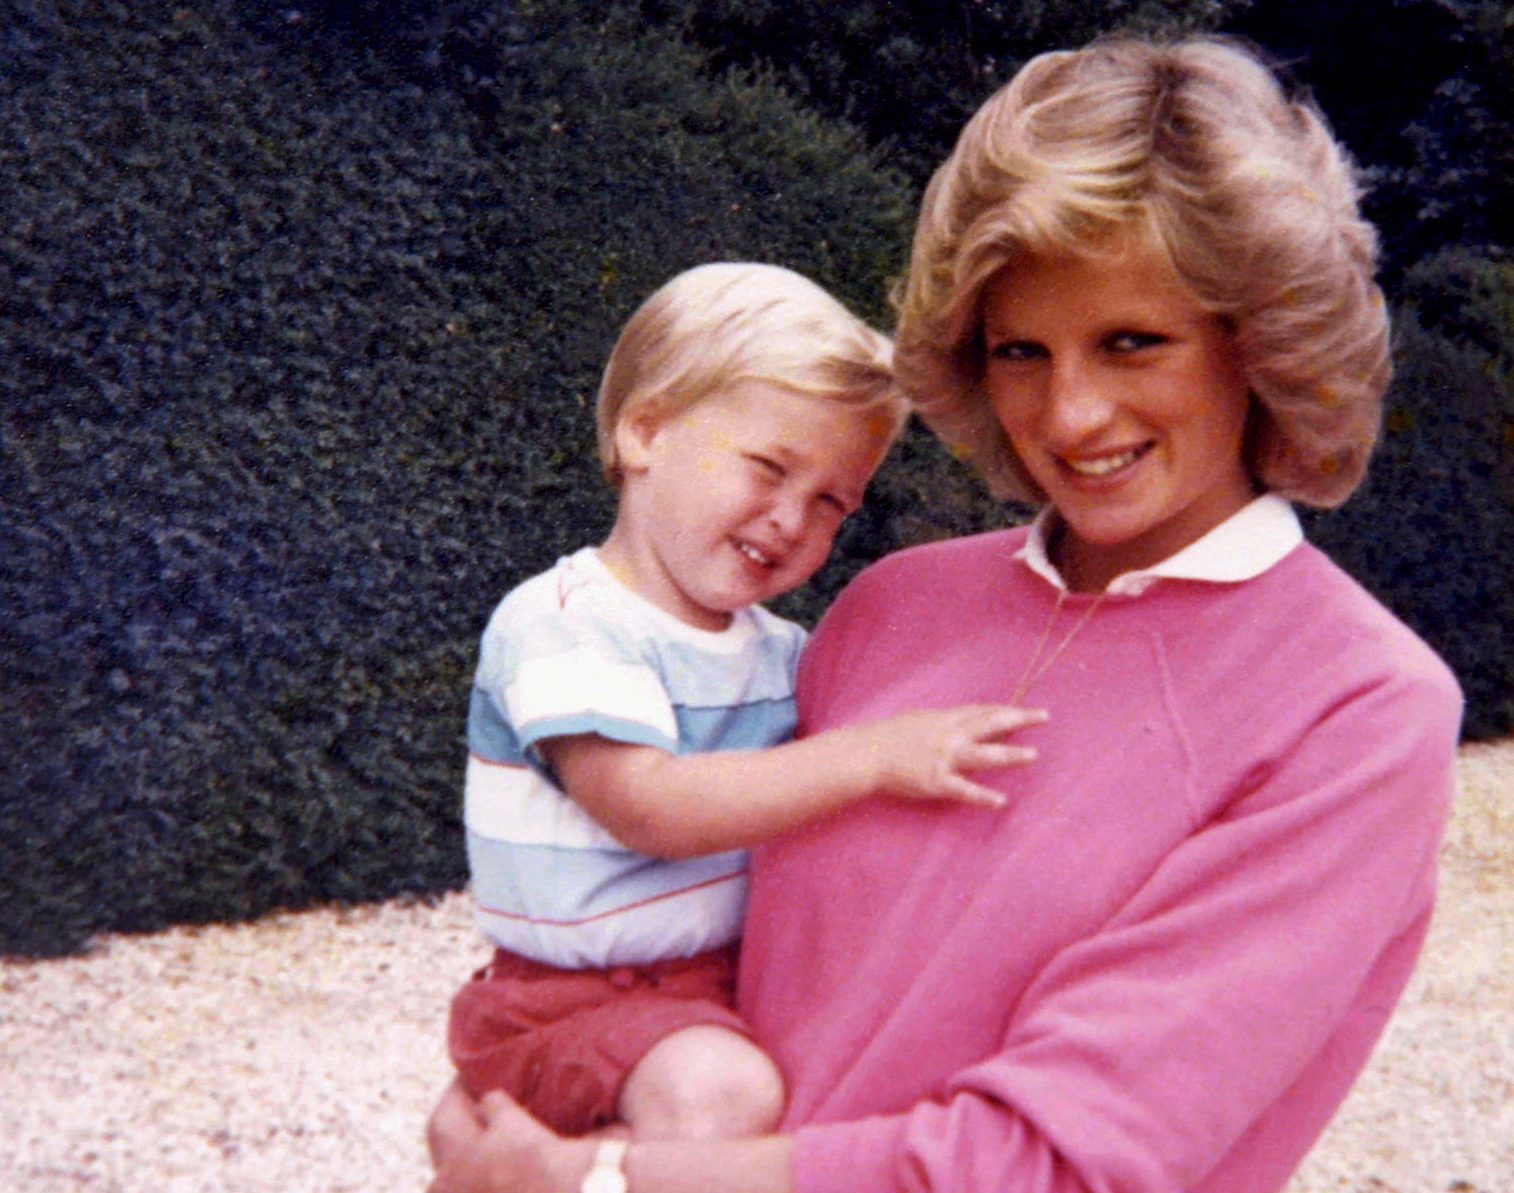 Photograph released by Kensington Palace, from the personal photo album of the late Diana, Princess of Wales, shows the princess holding Prince William whilst pregnant with Prince Harry, and features in the new ITV documentary 'Diana, Our Mother: Her Life and Legacy', which airs on ITV at 21.00hrs on Monday 24th July. (The Duke of Cambridge and Prince Harry)